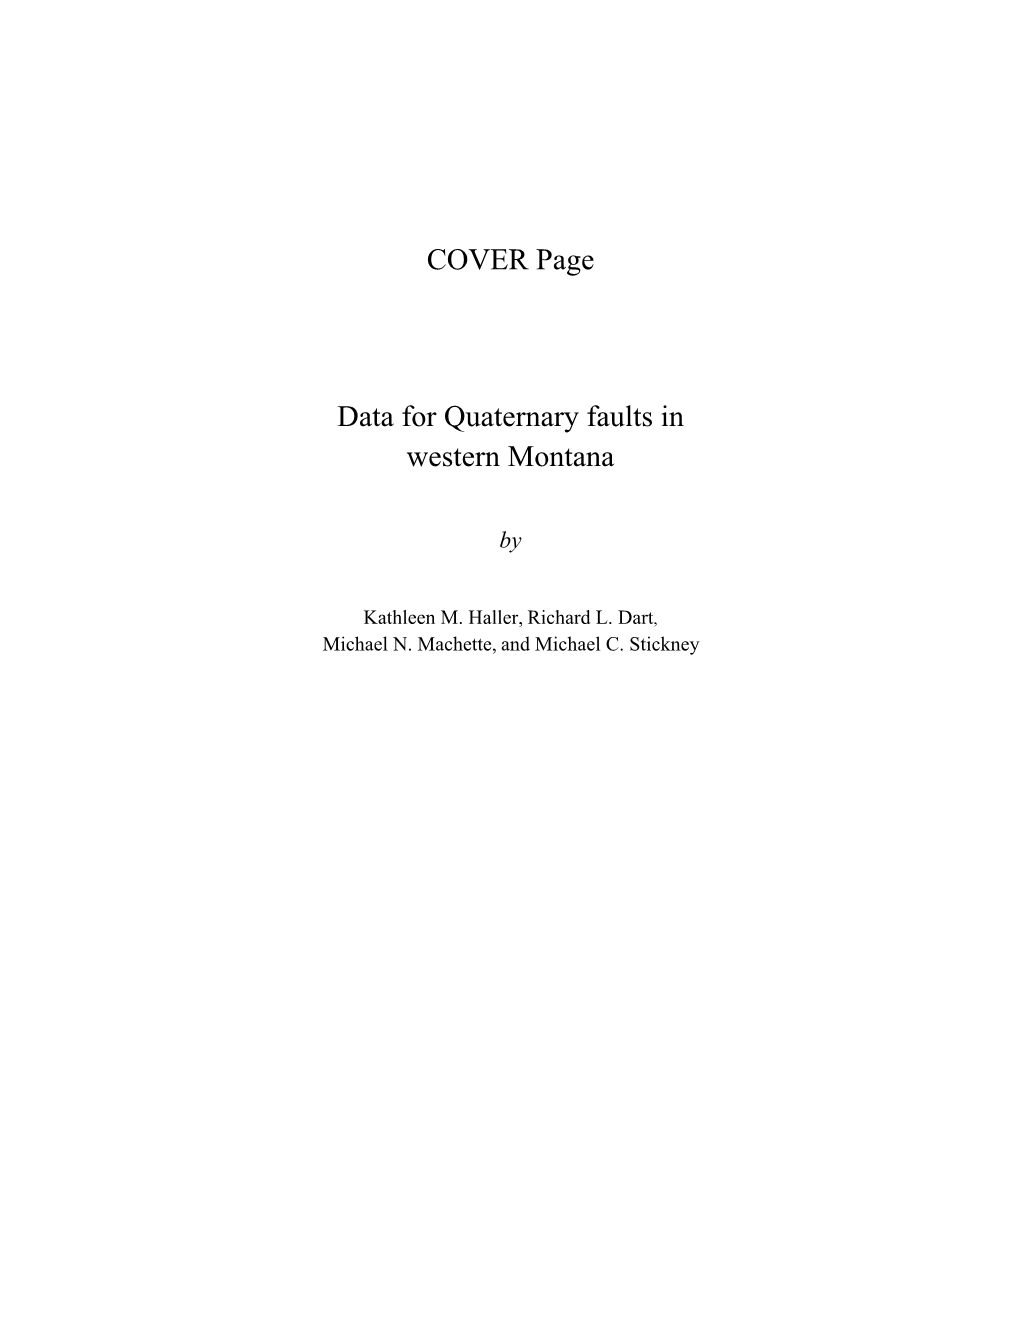 COVER Page Data for Quaternary Faults in Western Montana